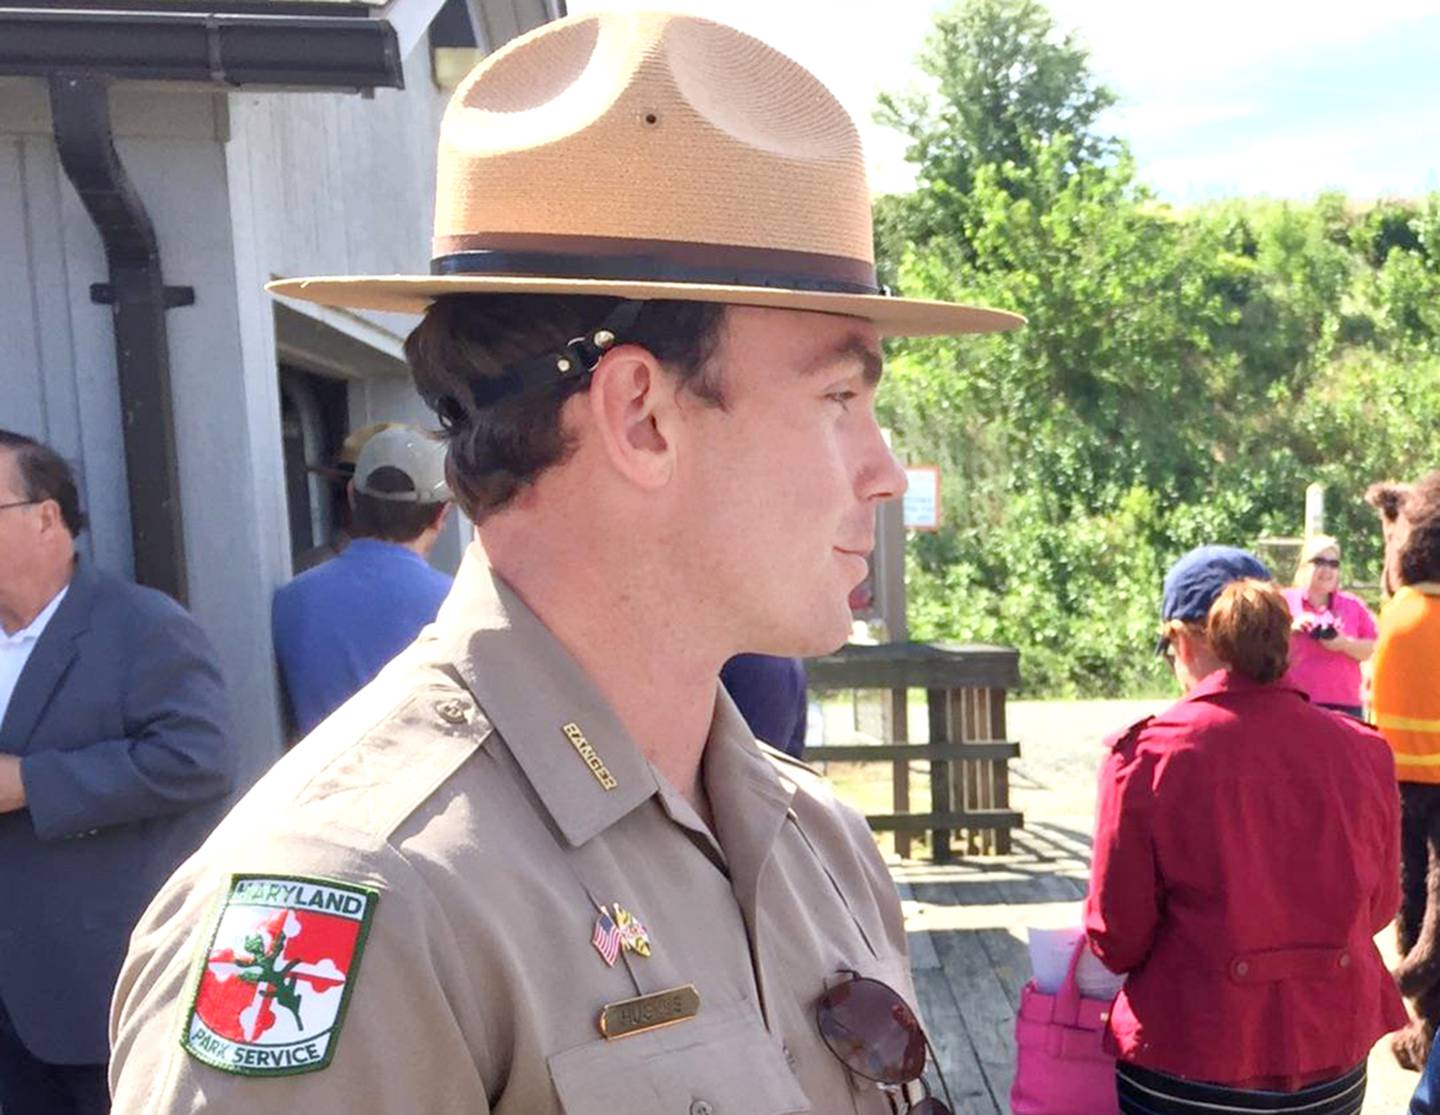 Dean Hughes, shown at a 2016 event, began working in the park system in 2009 and became assistant park manager at Gunpowder Falls State Park in 2015. He recently left the agency amid questions about his conduct.